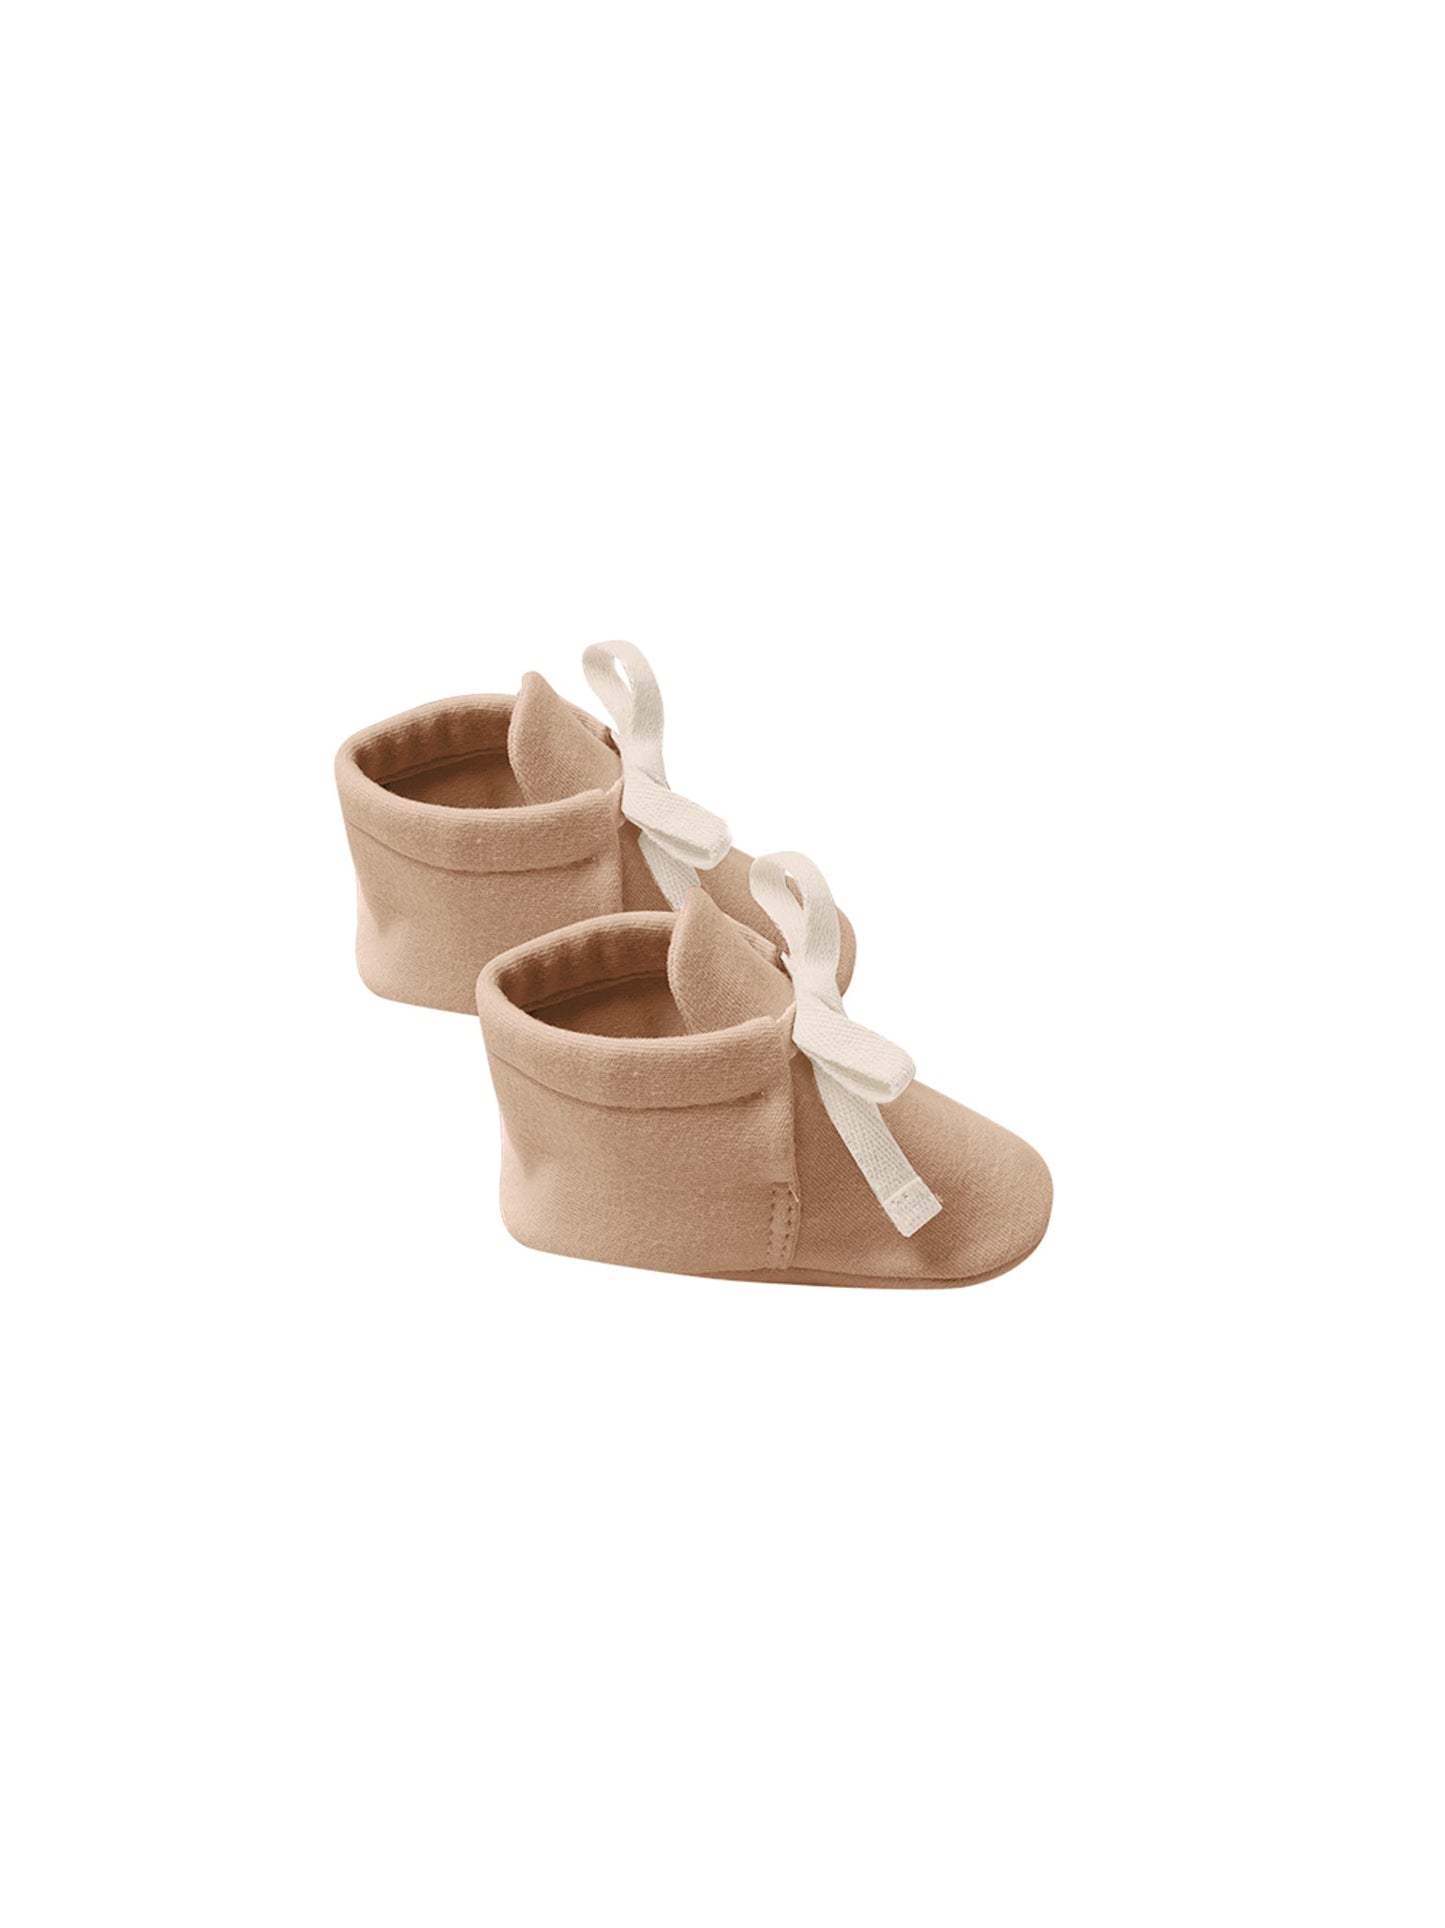 Baby Booties / Apricot